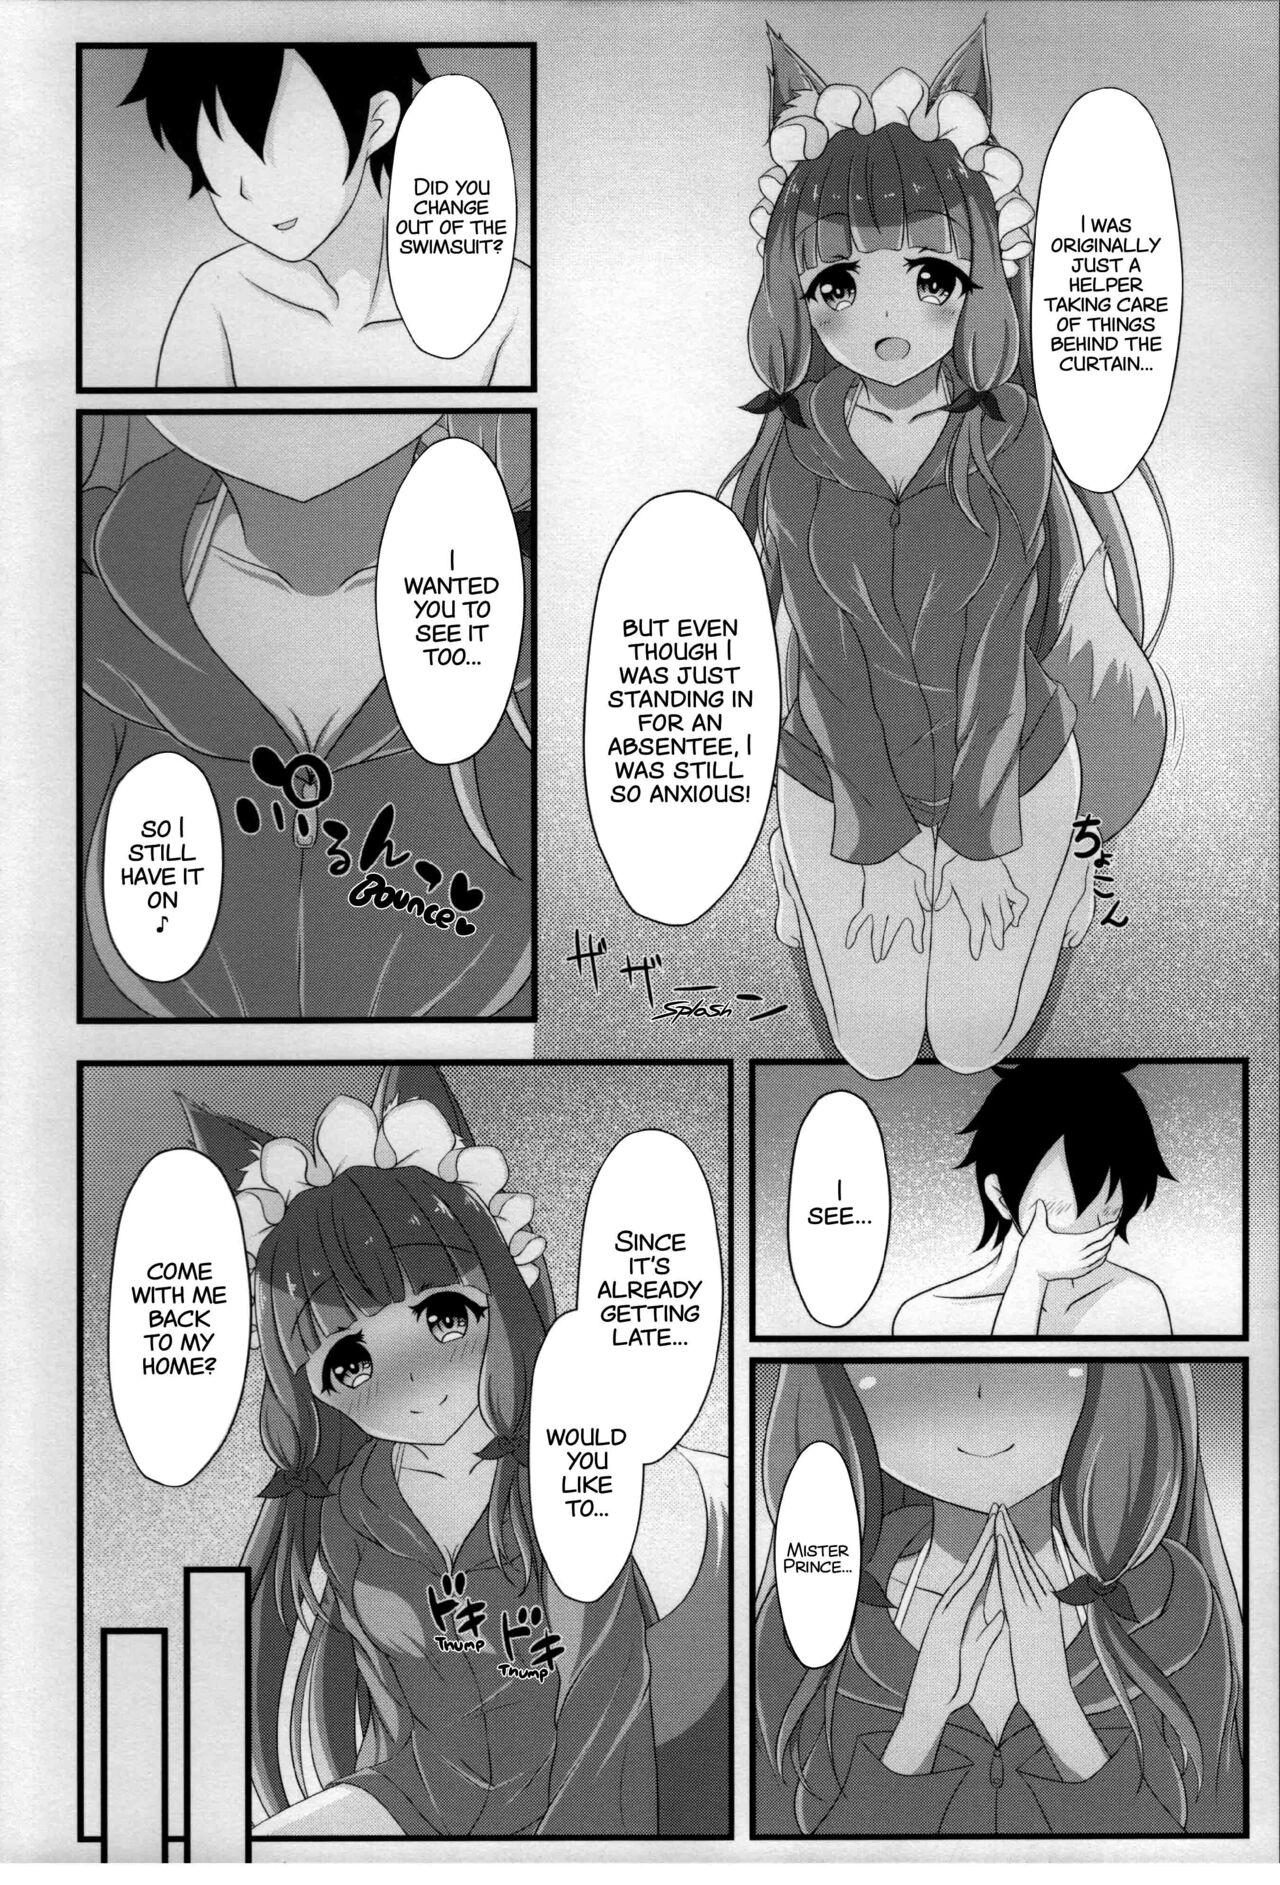 Face Sitting Maho Hime Connect! 2 - Princess connect Cruising - Page 7